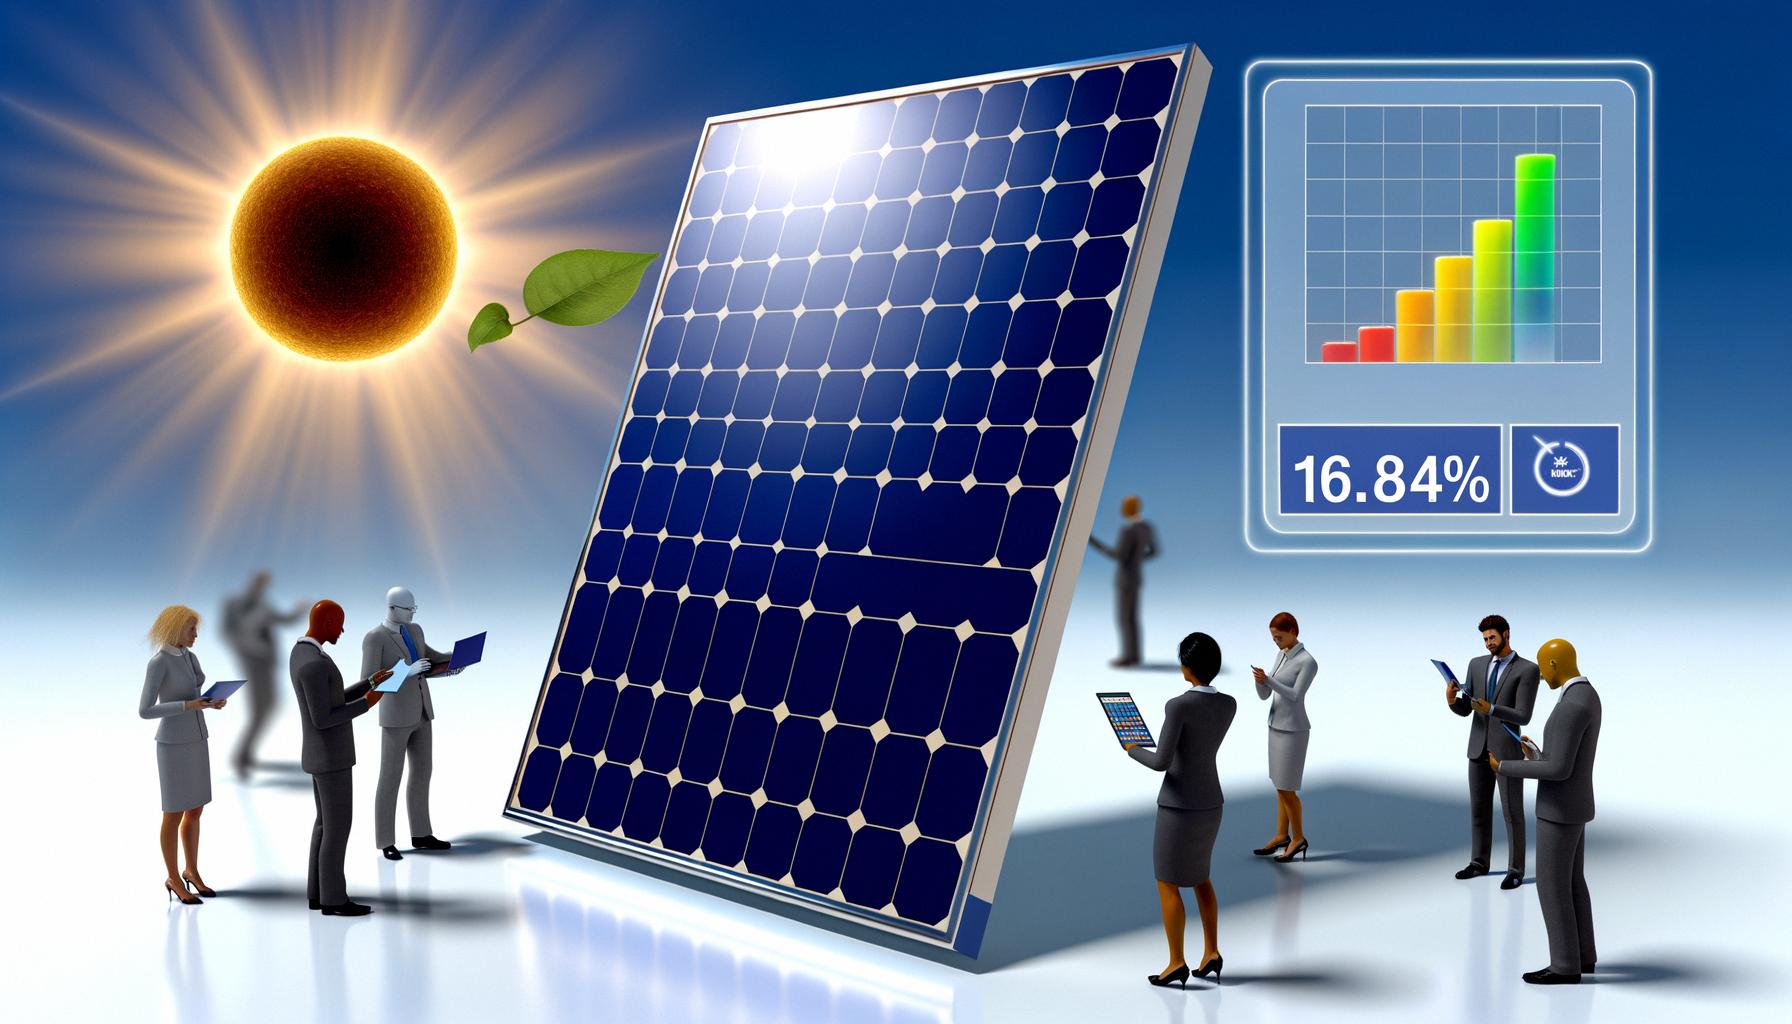 New solar cell hits 16.94% efficiency